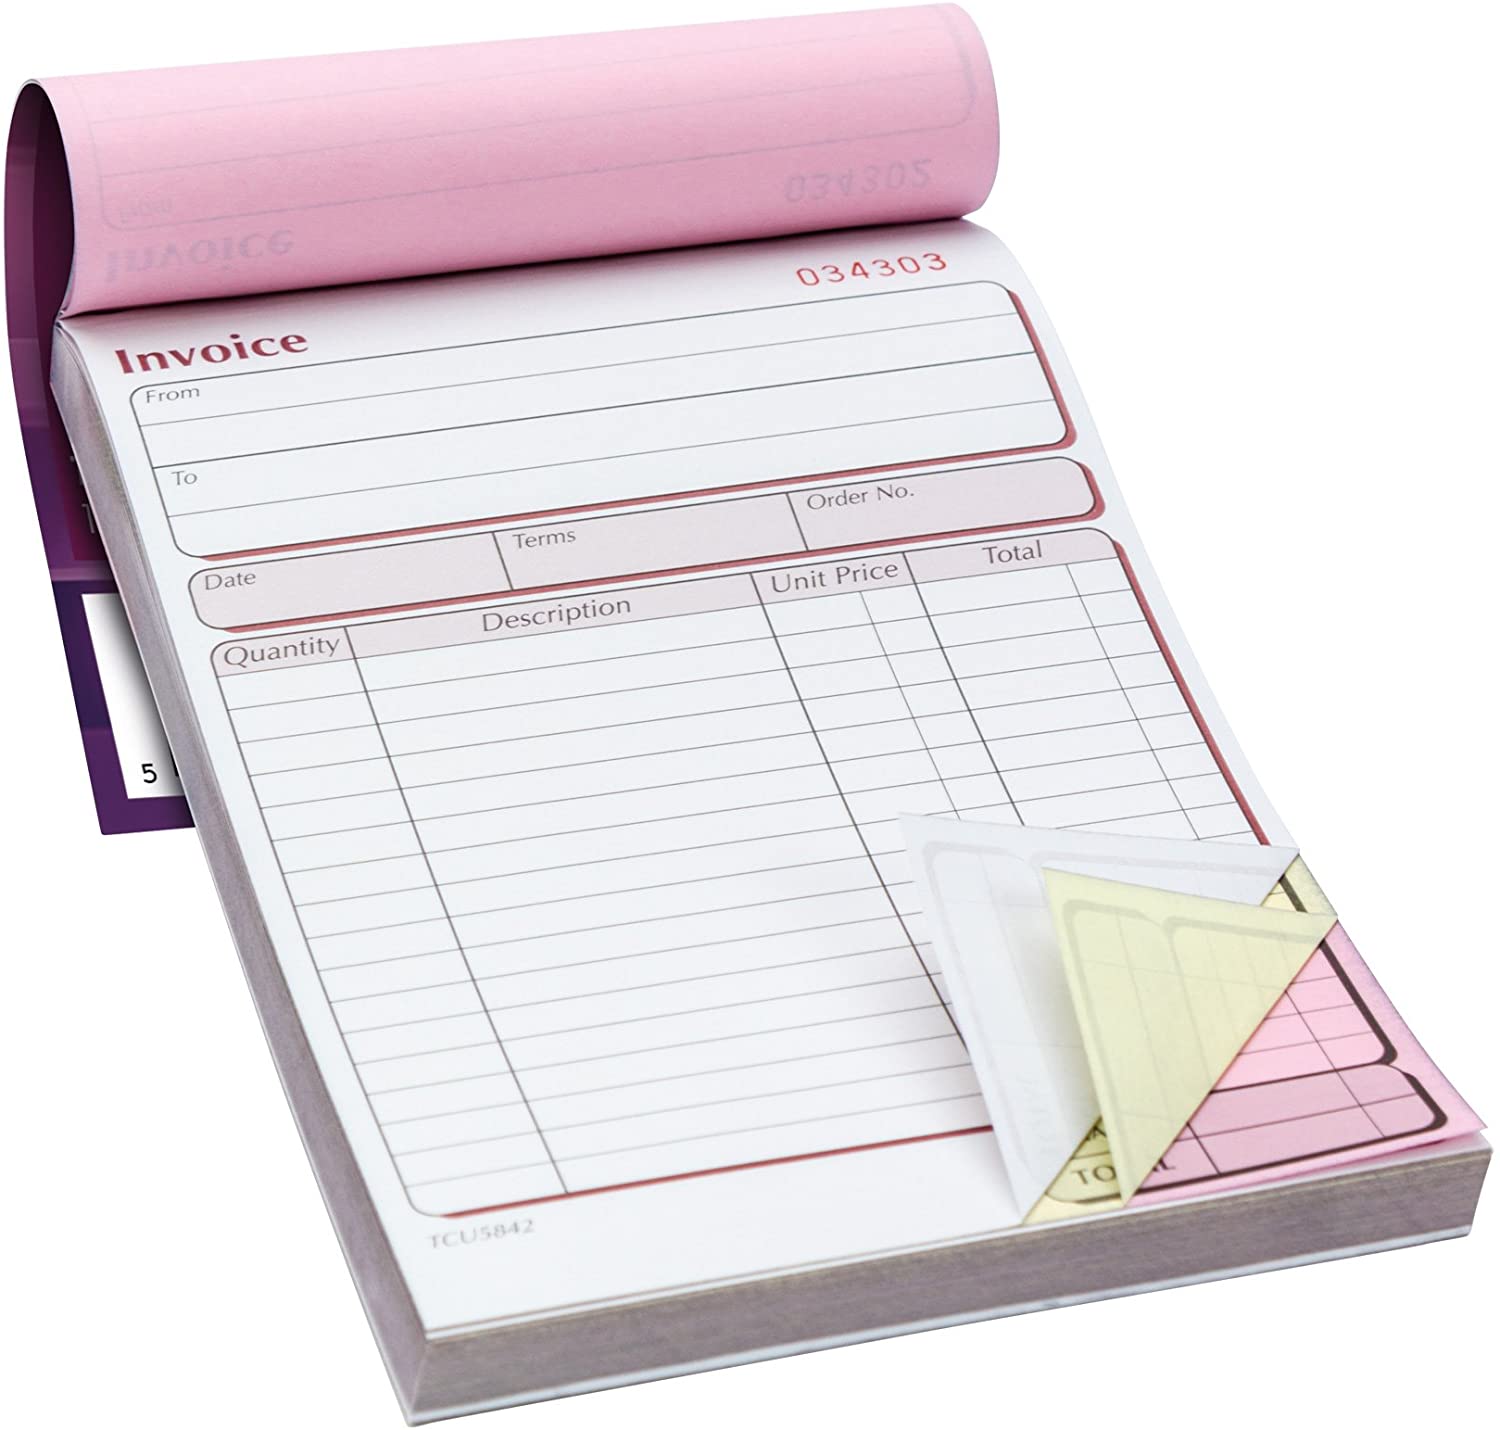 Invoice / Receipt Books Branding & Printing Solutions Company in